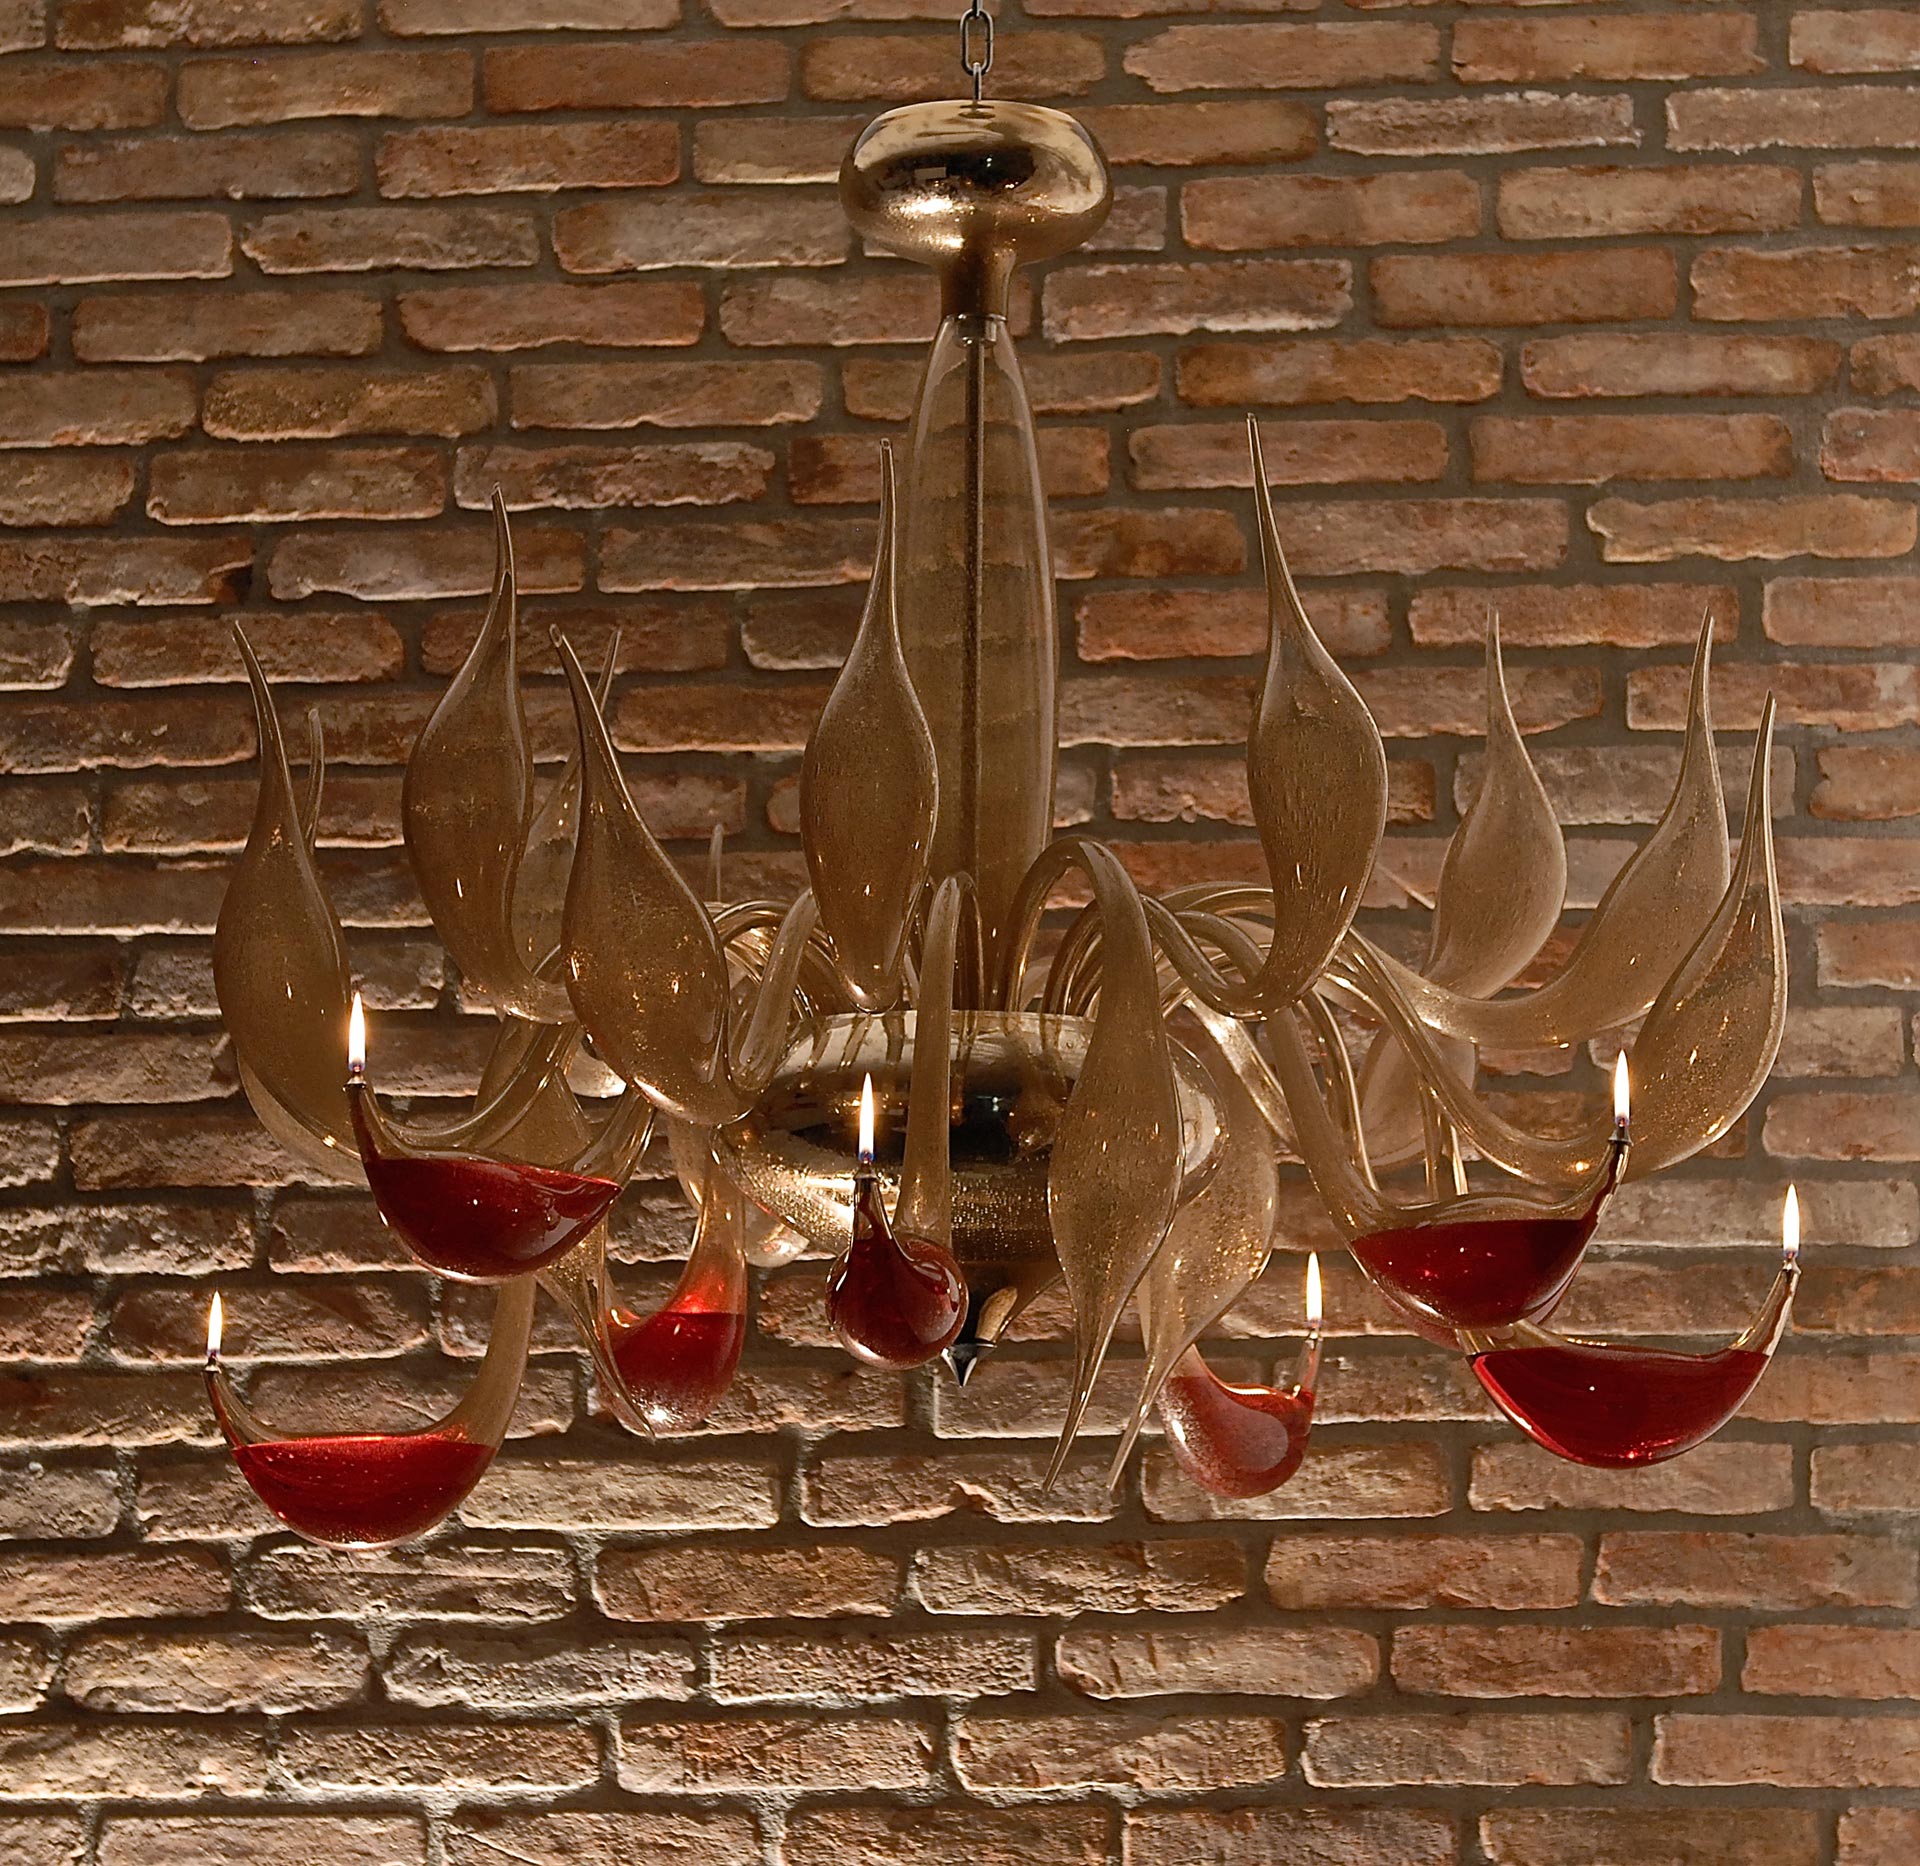 Transparent chandelier with red oil